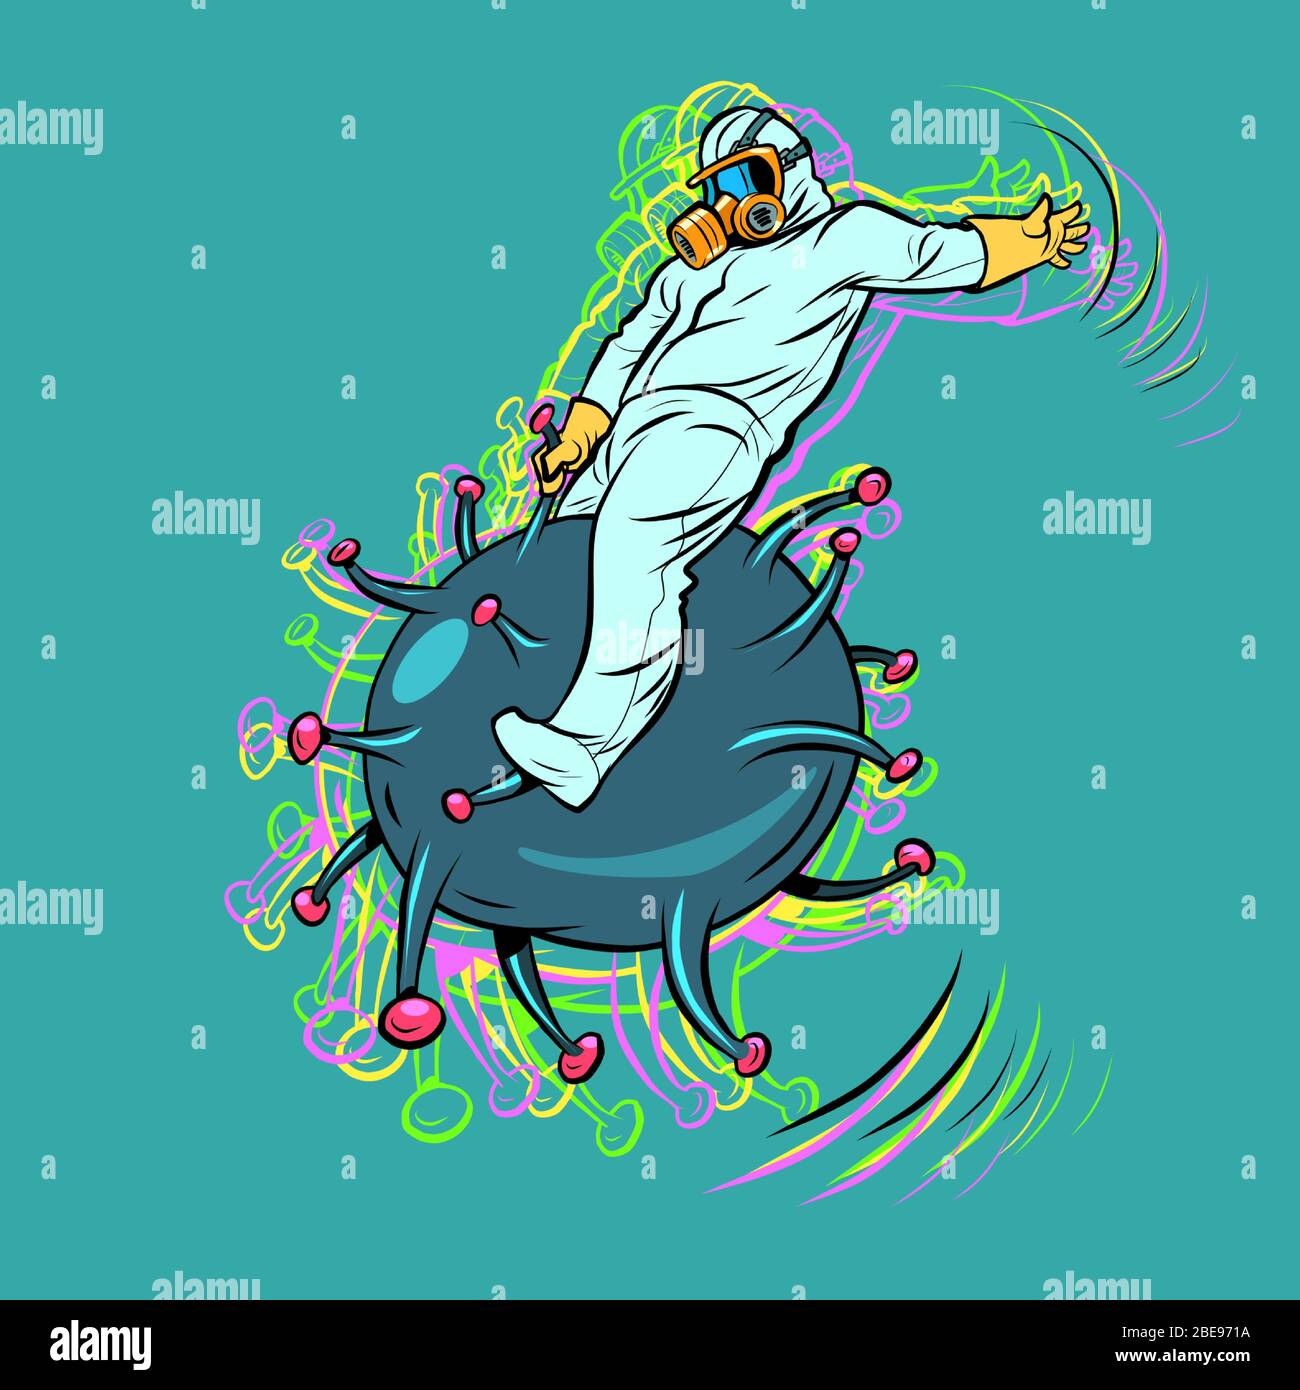 the doctor fights the coronavirus like a wild horse. Search for a vaccine. Science and health Stock Vector